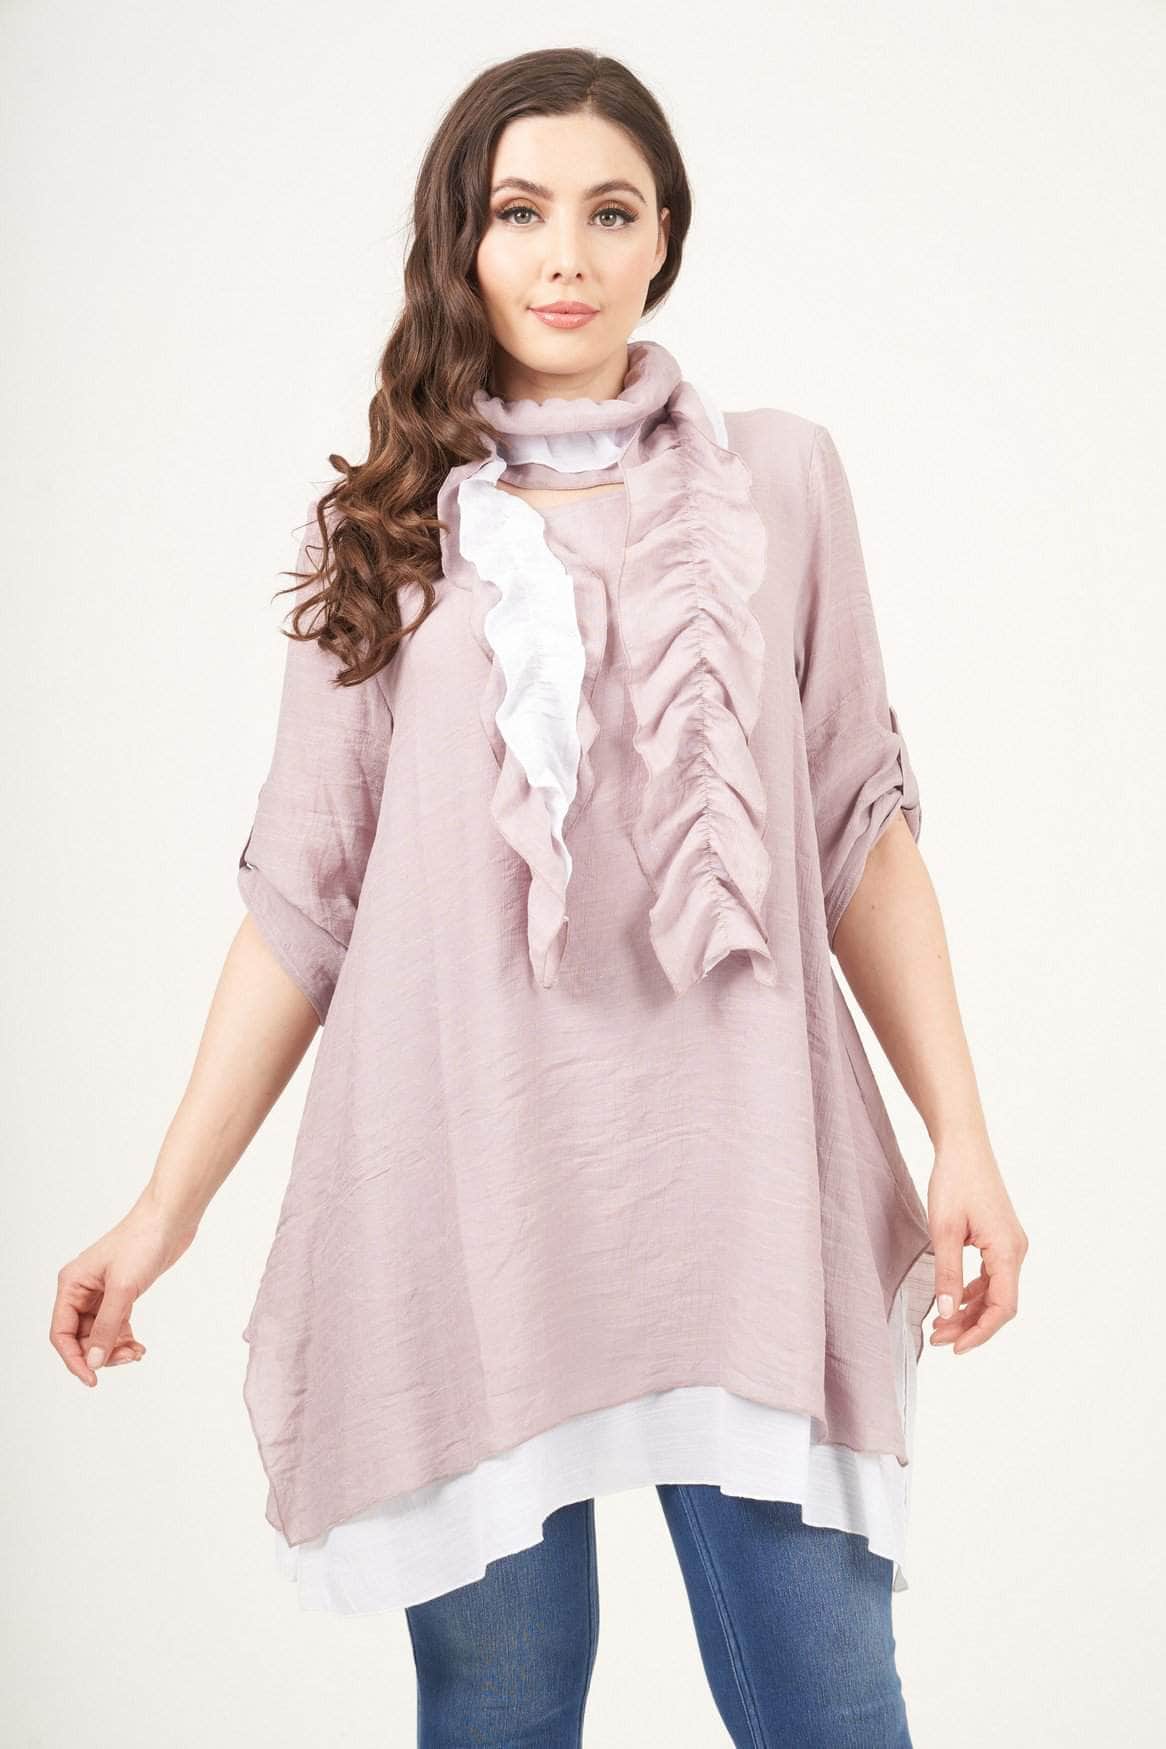 Saloos Tunic 10 / Stone Raelynn Linen-Look Layered Tunic with Scarf